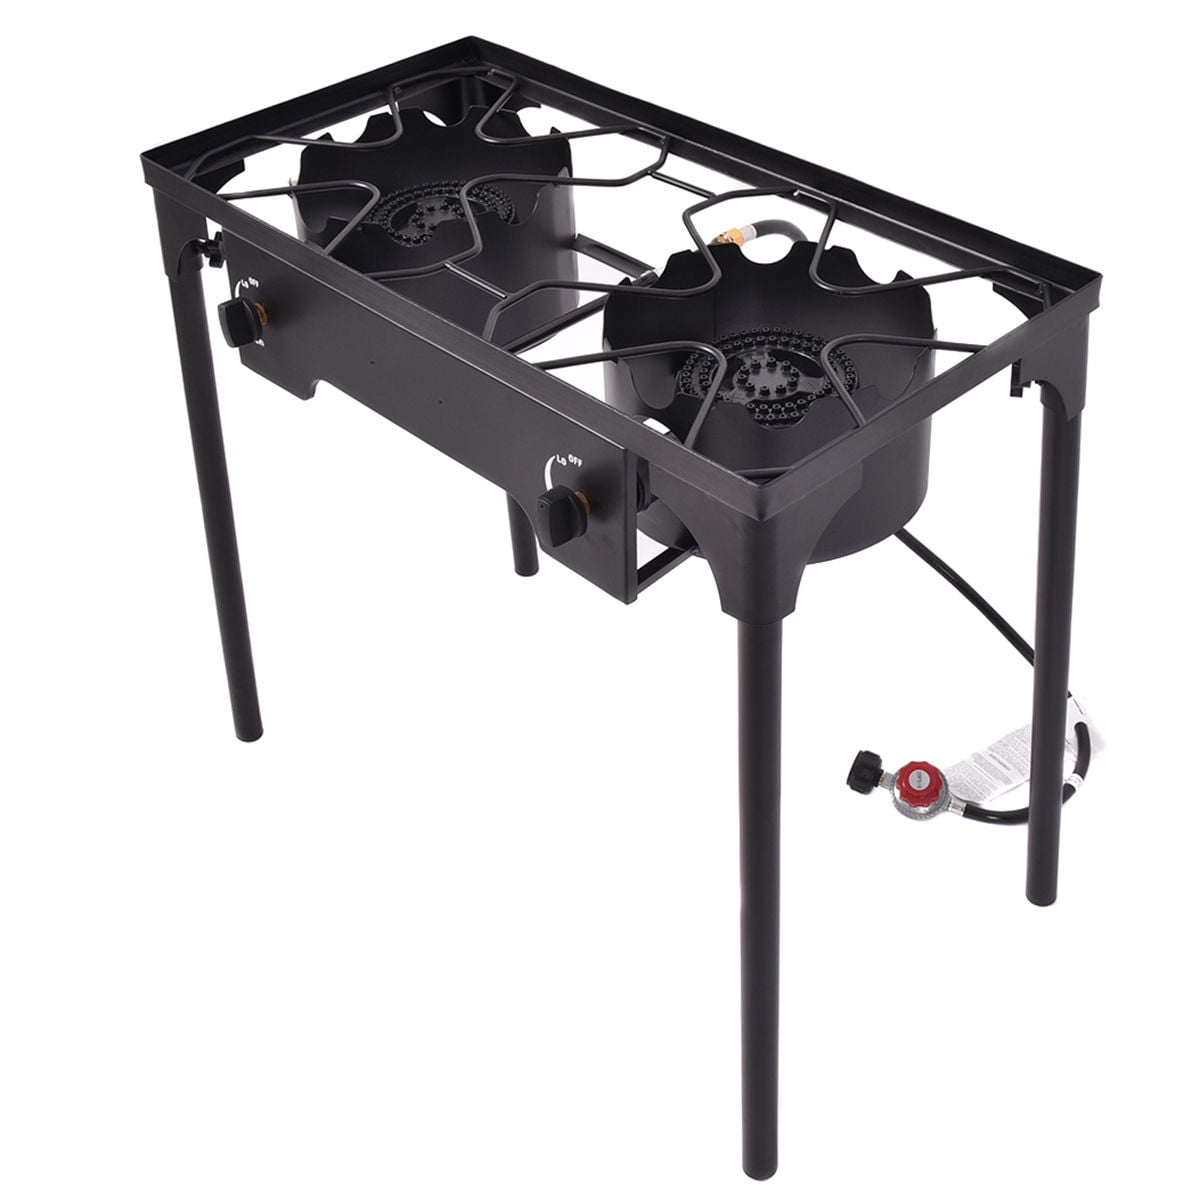 200,000-BTU Giantex Single/Double/ 3 Burner Outdoor Stand Stove Cooker Camping Cooking Stove with/Without Adjustable Legs 100,000-BTU 225,000-BTU 